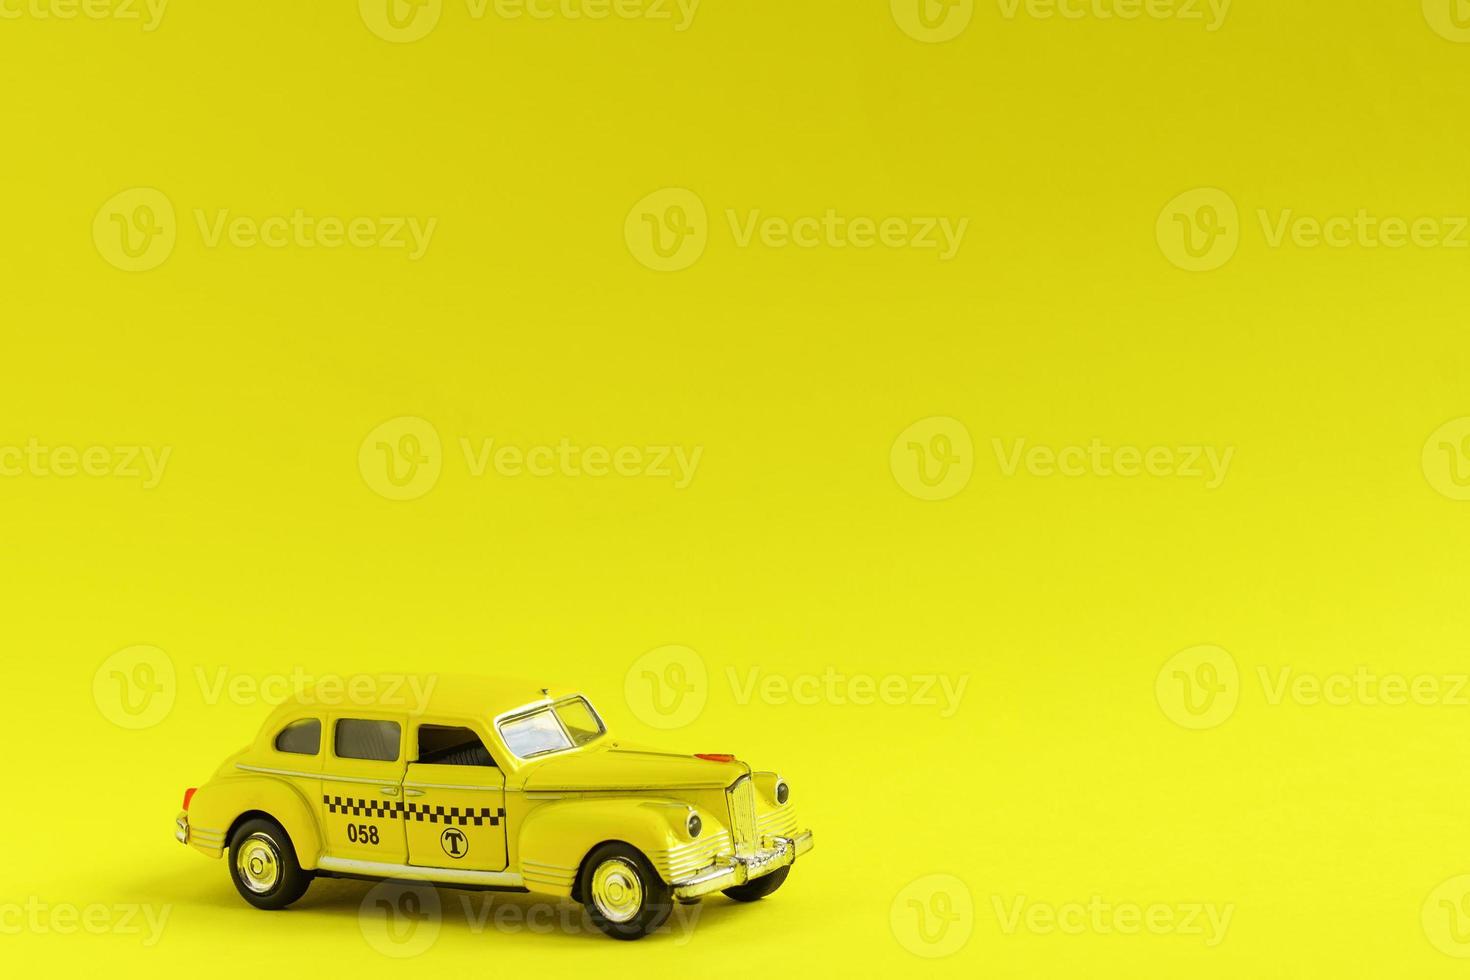 Old retro yellow toy car taxi on yellow background with copy space. Travel concept photo